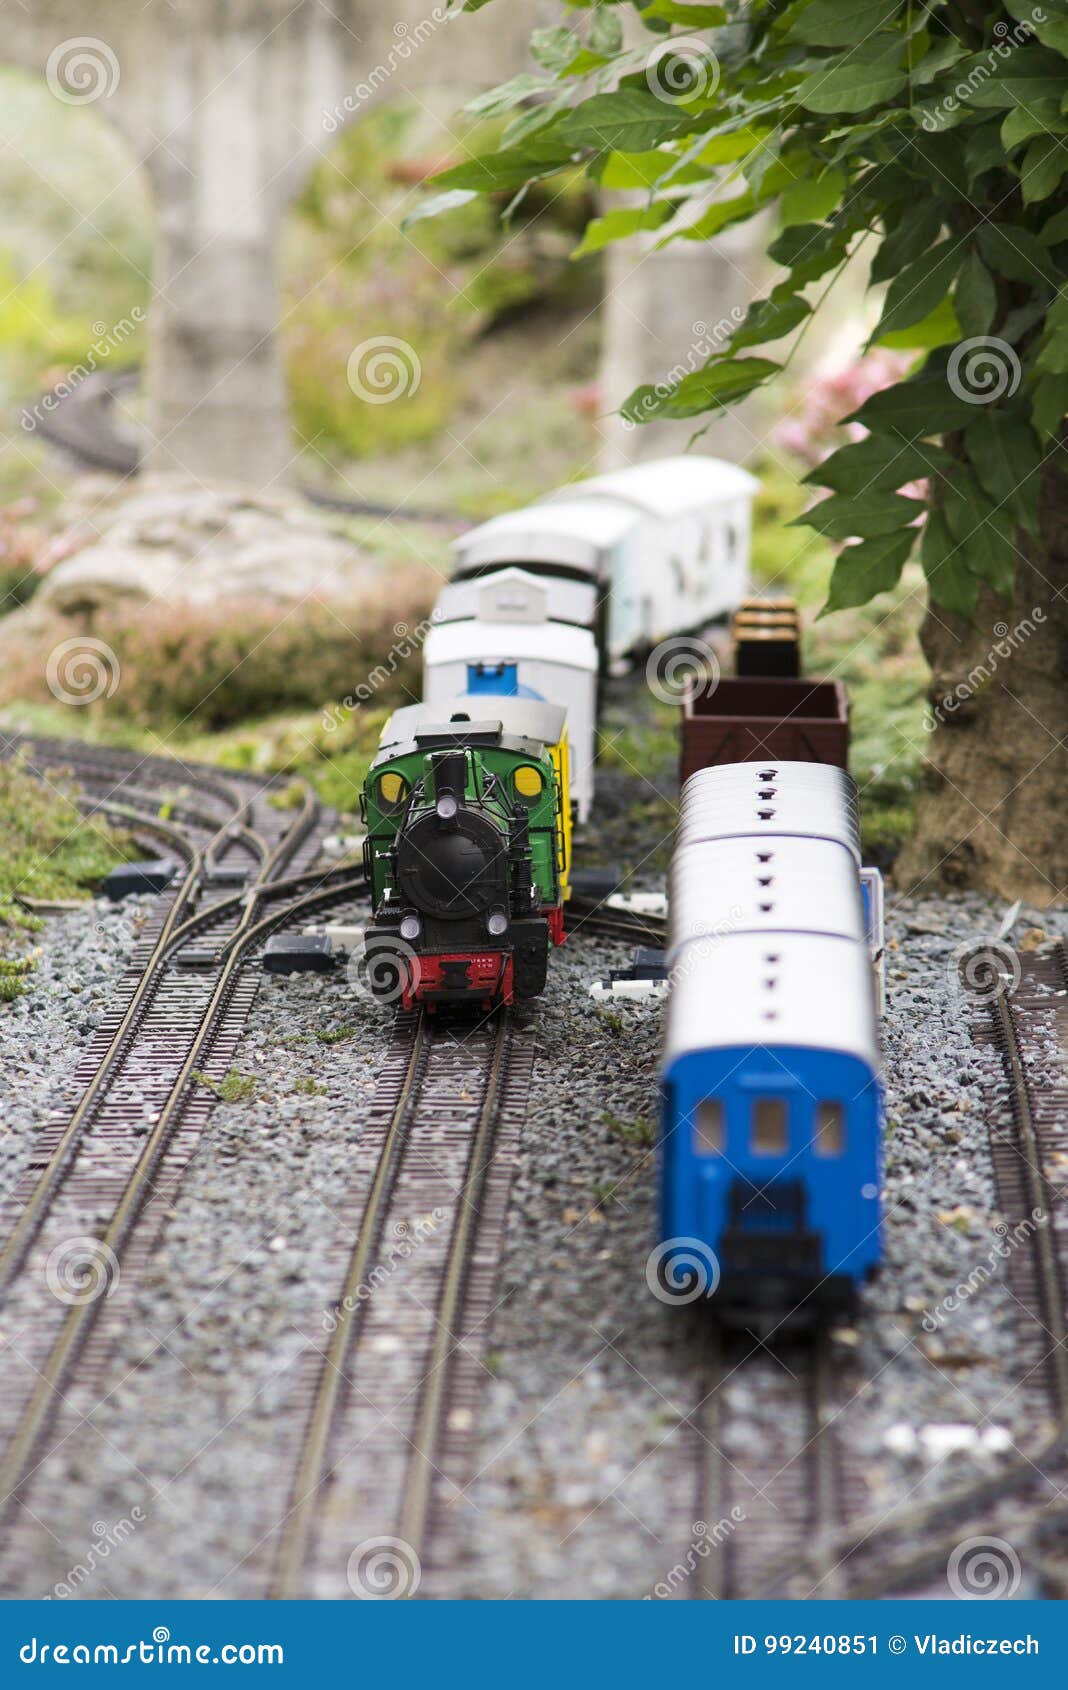 Hands about To Pick Up Train Model Set Stock Image - Image of ...